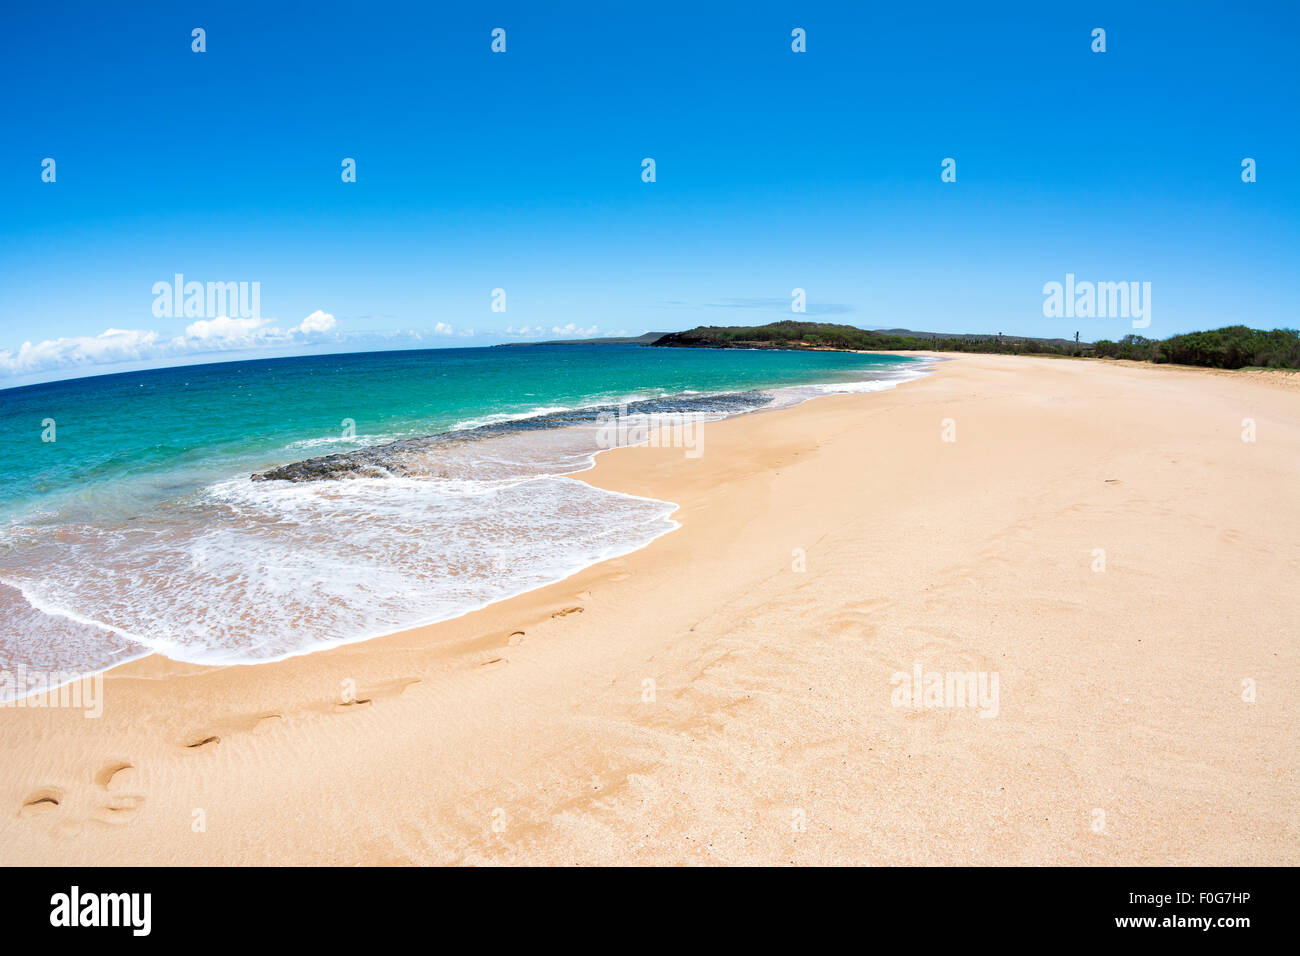 A beautiful white sand beach with clear blue water on a remote beach in Molokai Hawaii. Stock Photo